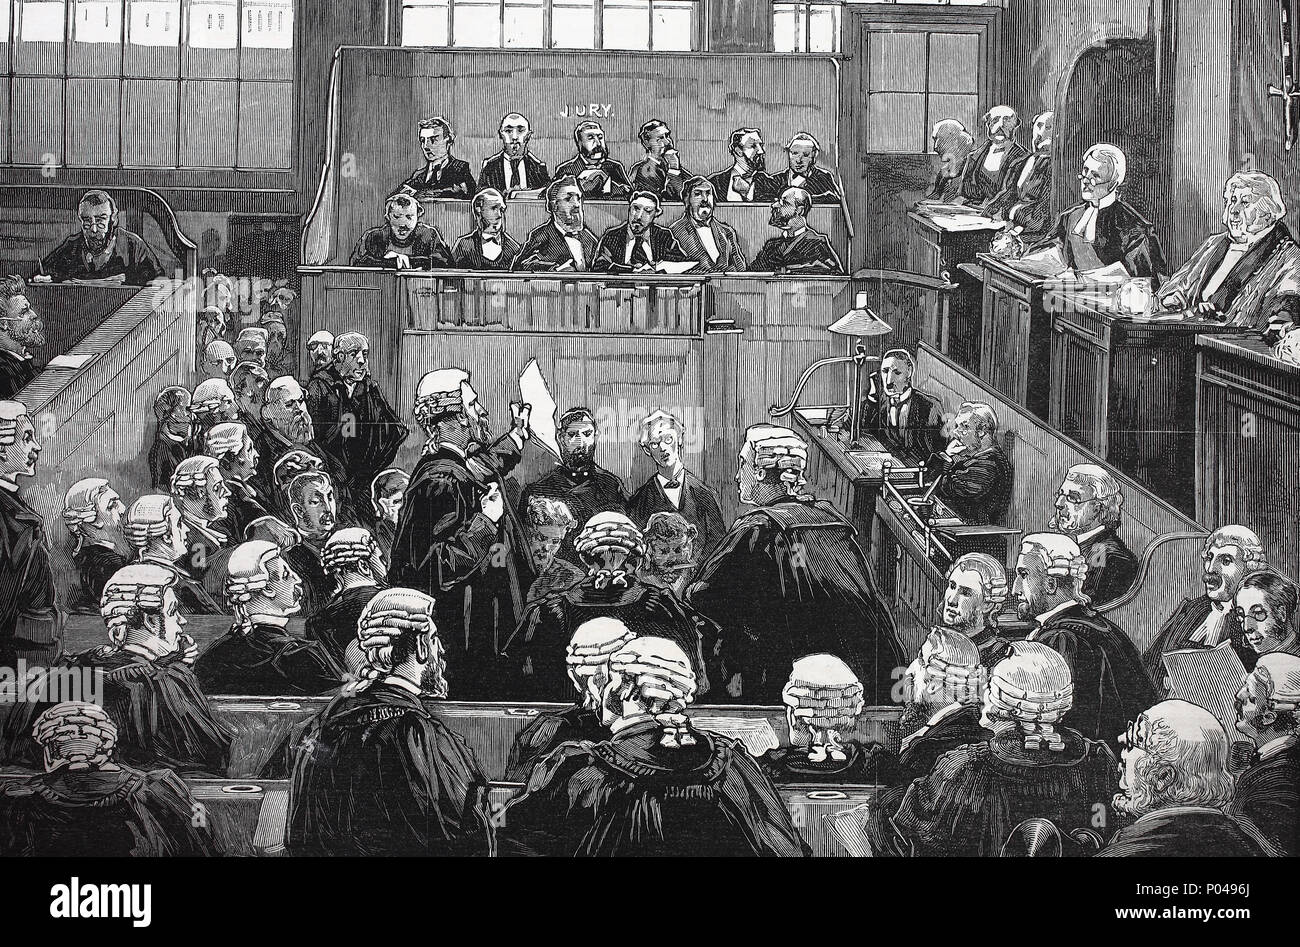 the Freiheit prosecution trial of Herr Most at the central criminal court, digital improved reproduction of an original print from the year 1881 Stock Photo